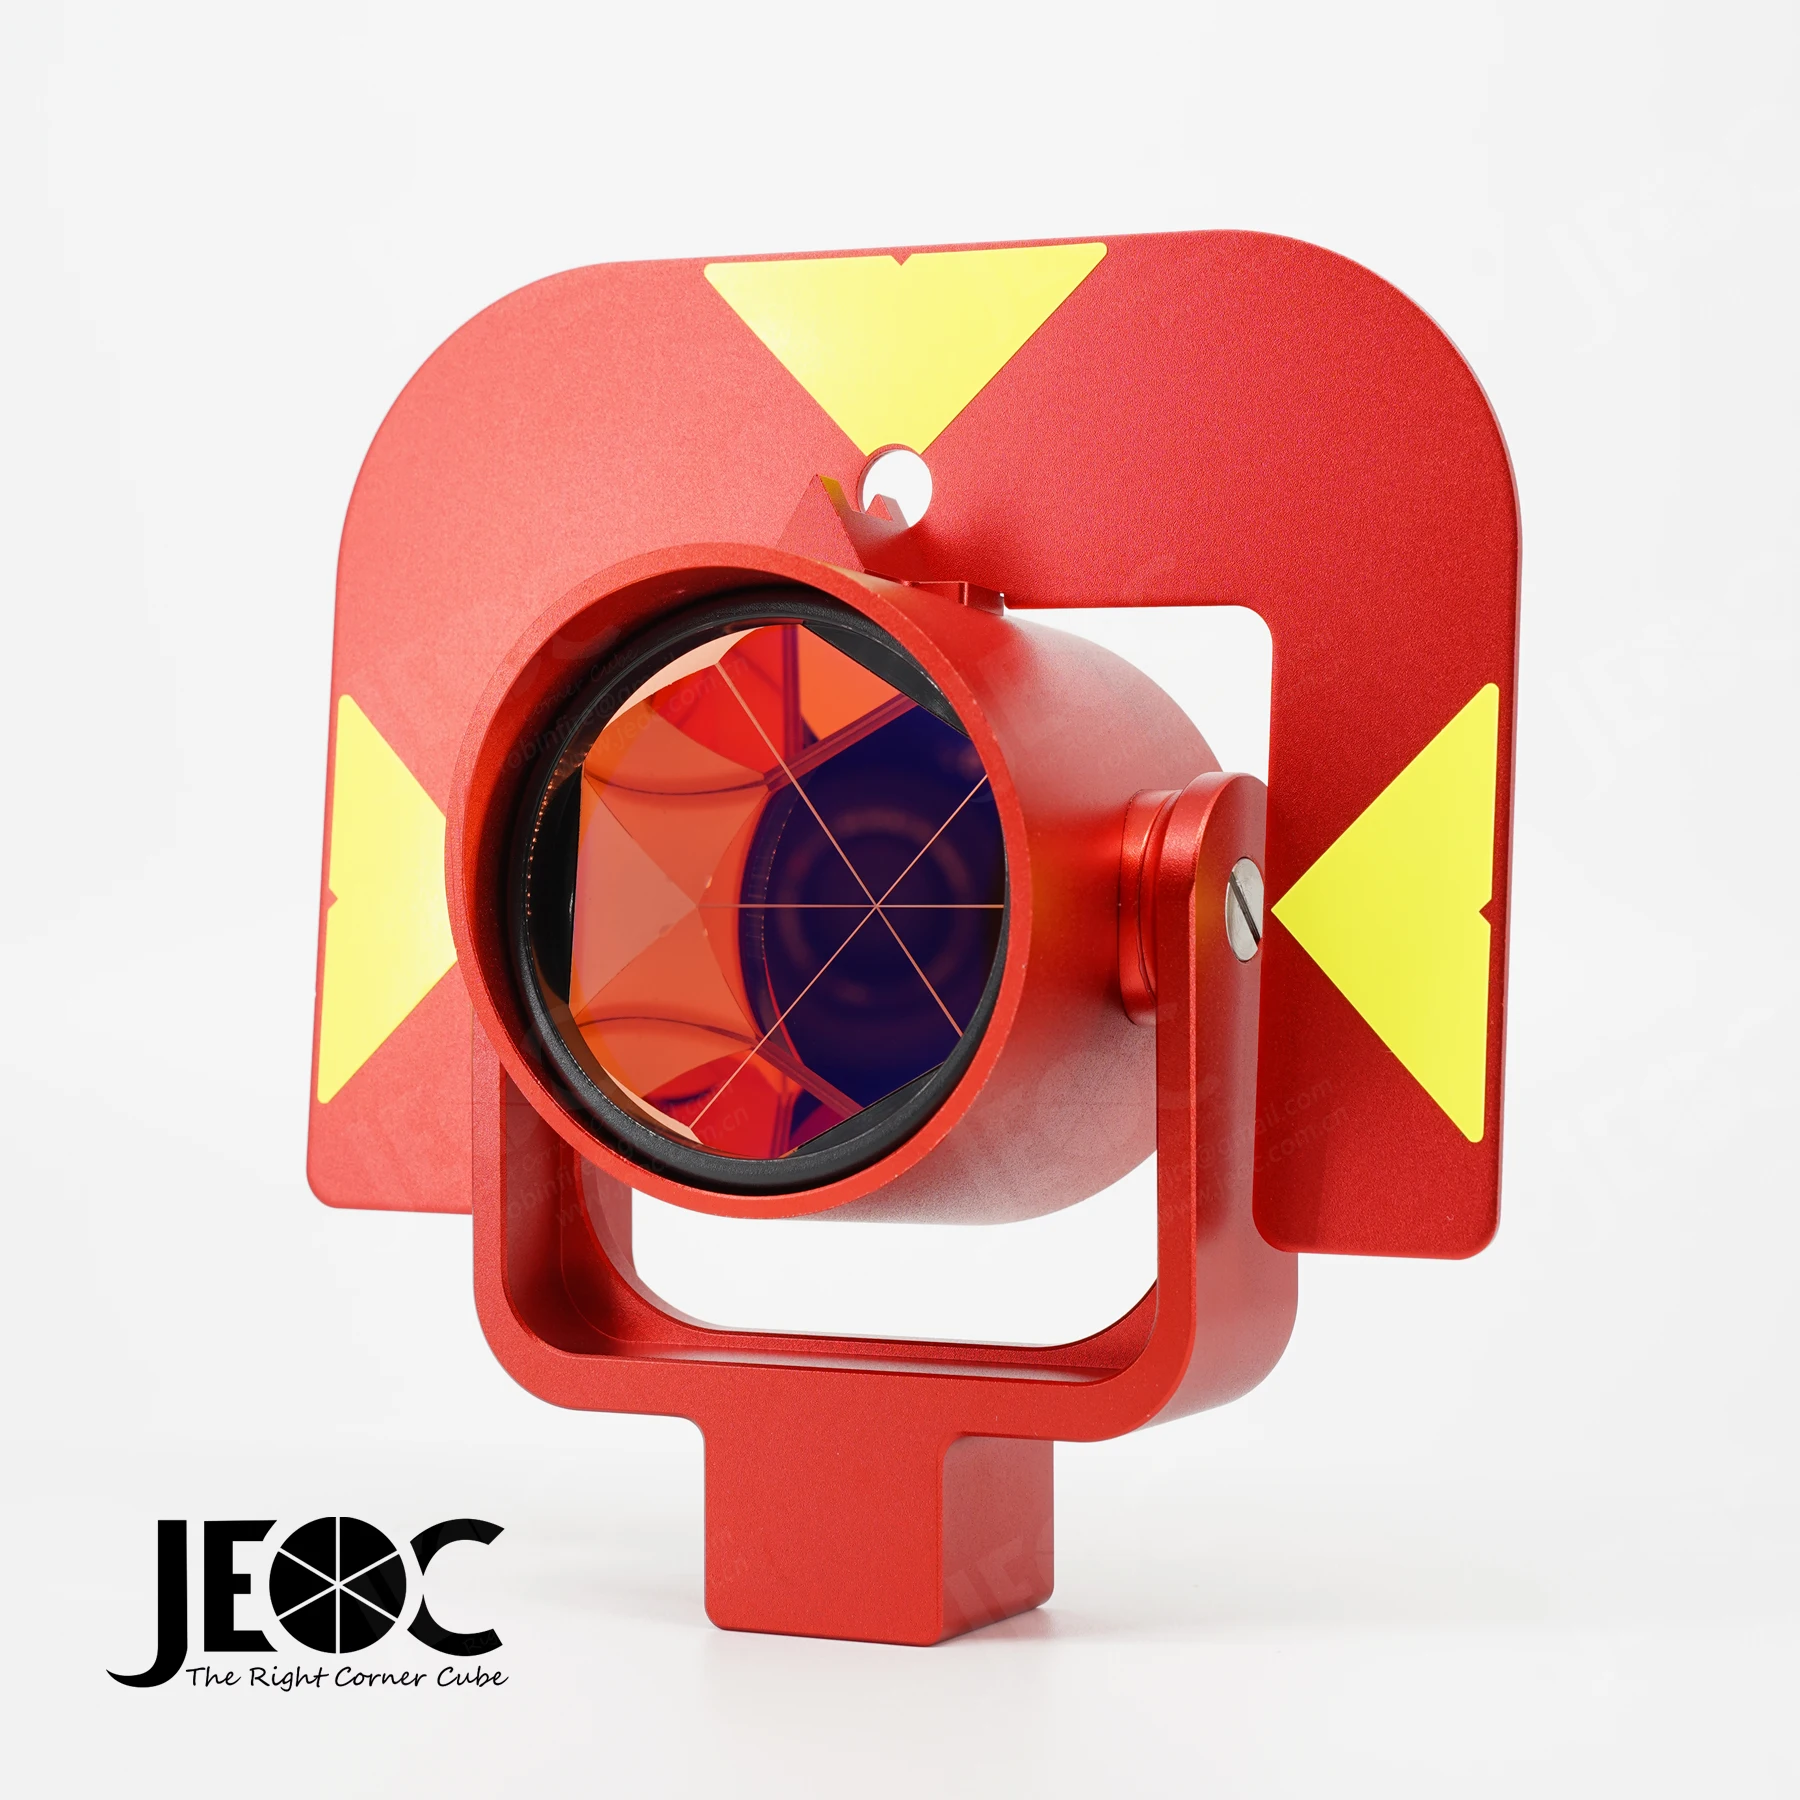 

JEOC Red GPR121 Accurate Reflective Prism, Surveying Reflector for Leica Total Station, Land Surveying Equipment Accessories